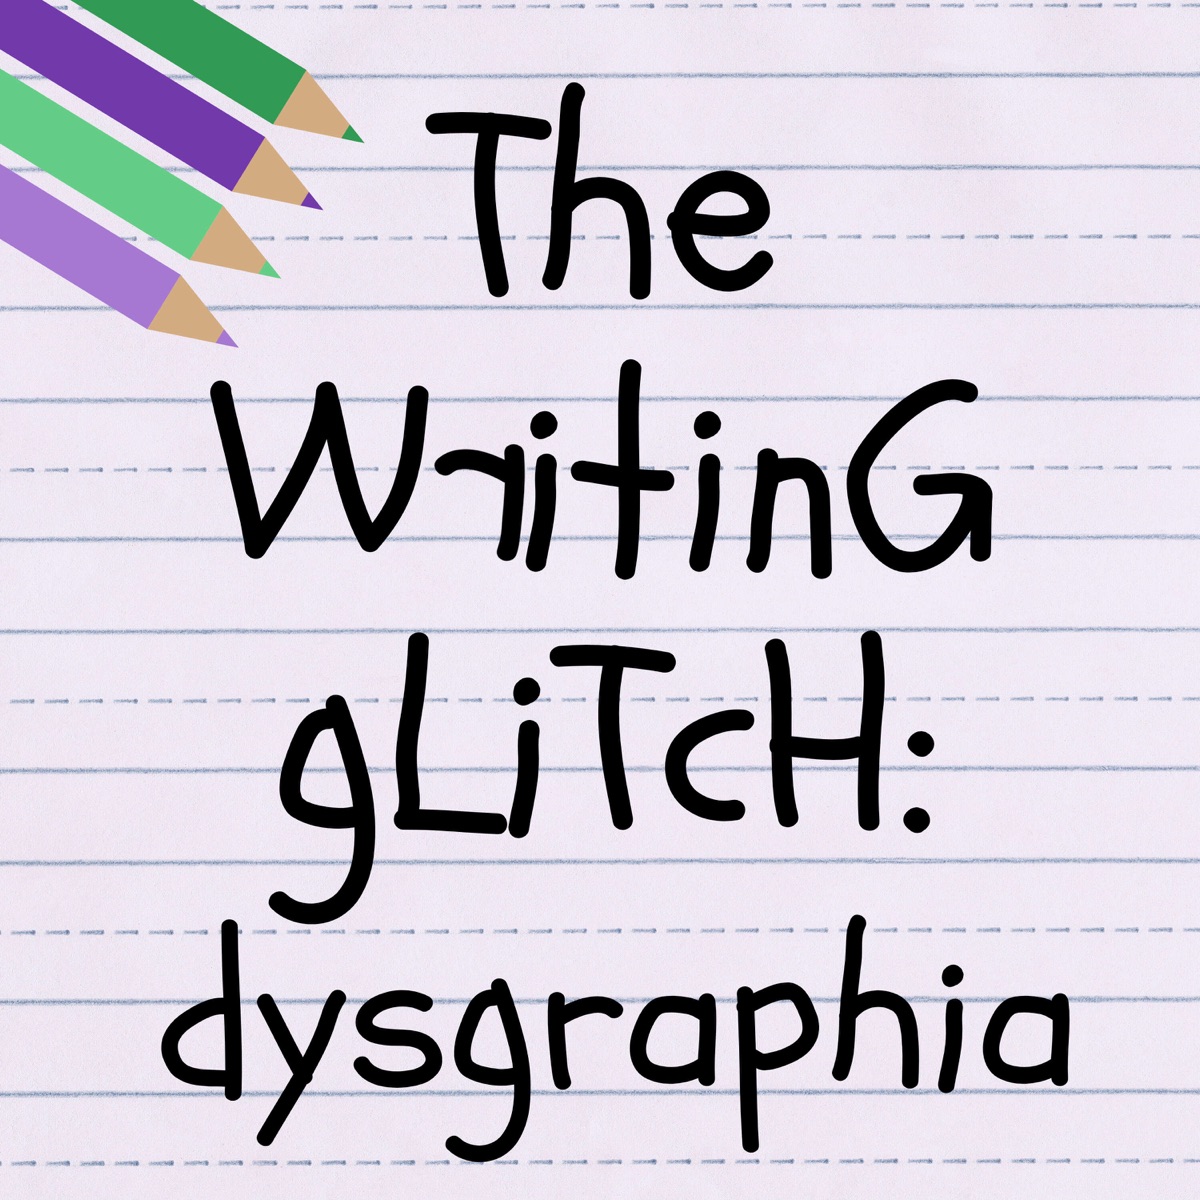 Dysgraphia in Children: An Occupational Therapist's Point of View